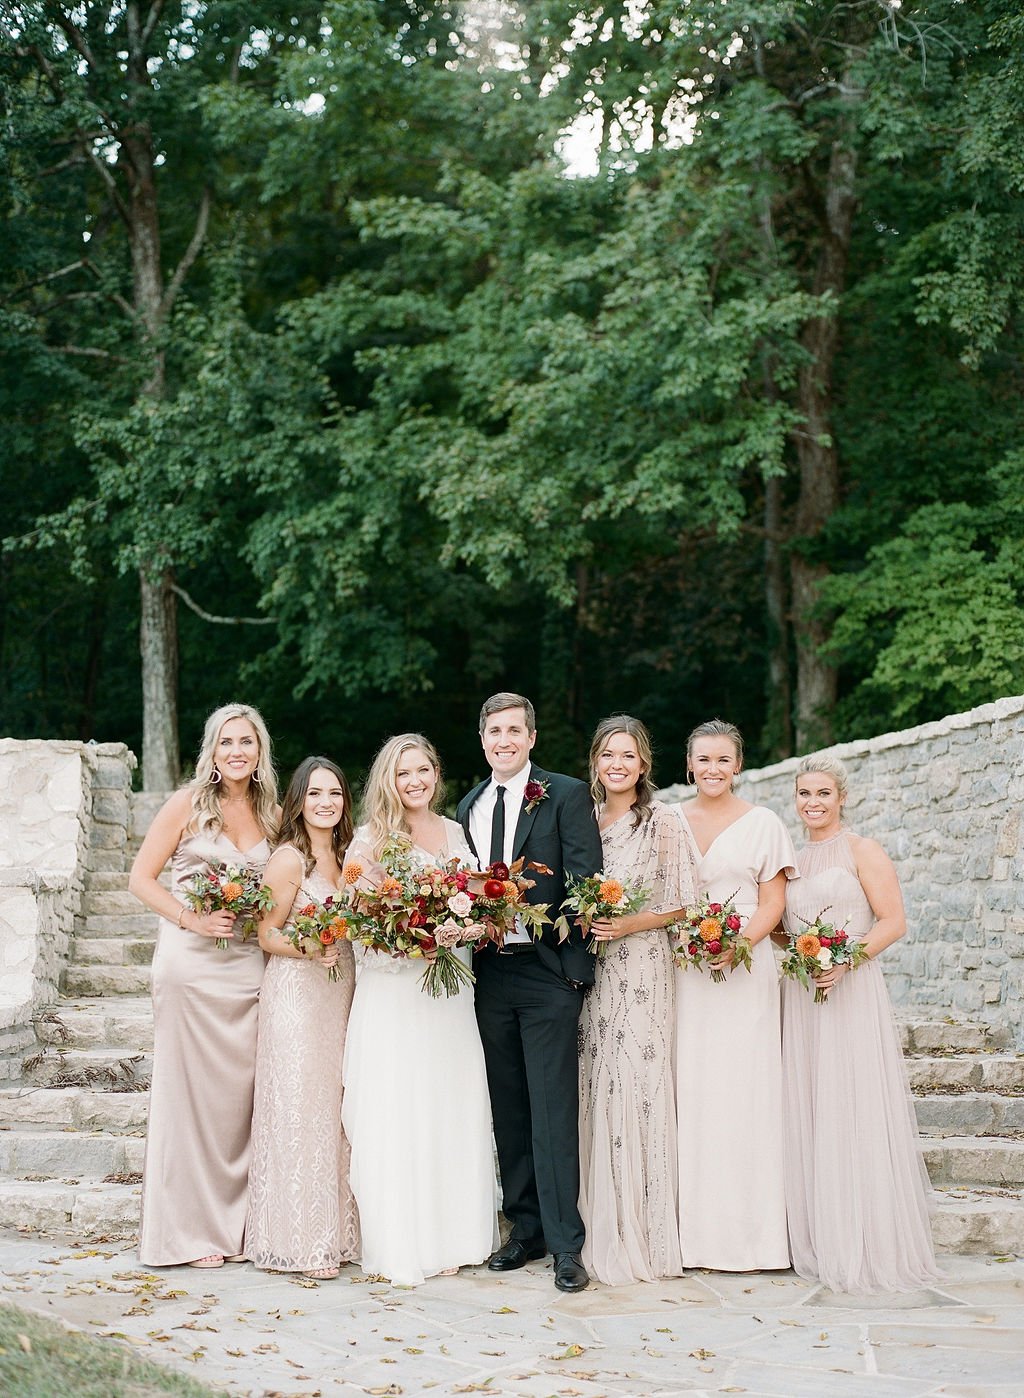 Sweet bridesmaid bouquet comprised of greenery, burnt orange, cream and pops of burgundy flowers featuring ranunculus, garden roses and dahlias. Floral Design by Rosemary and Finch in Nashville, TN.